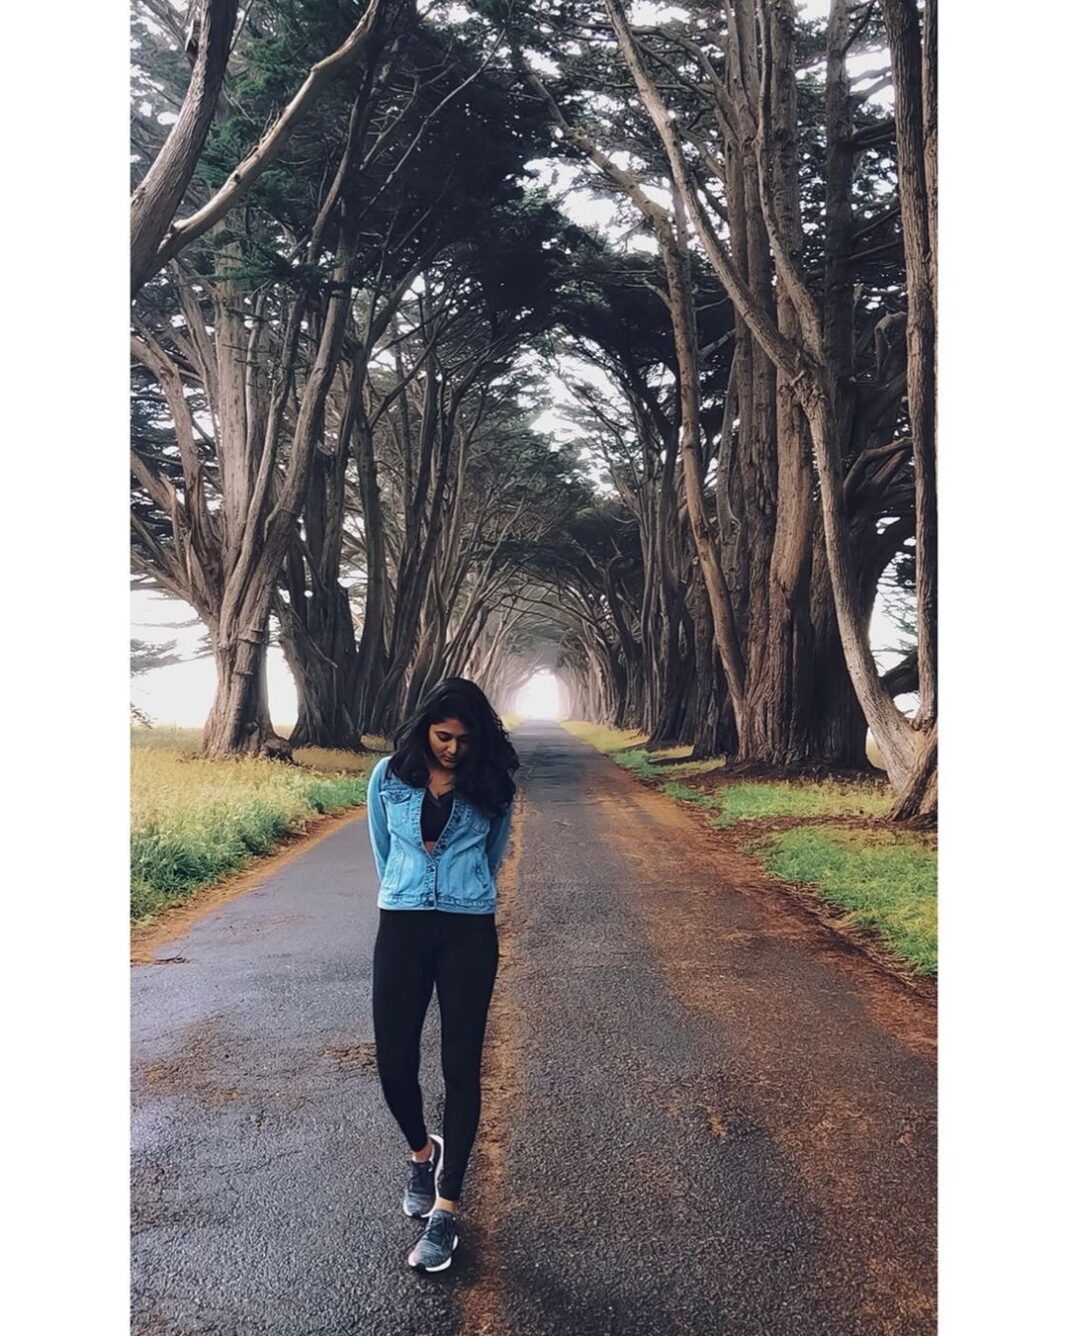 Sushma Raj Instagram - Golden Rule: treat others as you want to be treated. Platinum Rule: treat others as they want to be treated. Point Reyes National Seashore